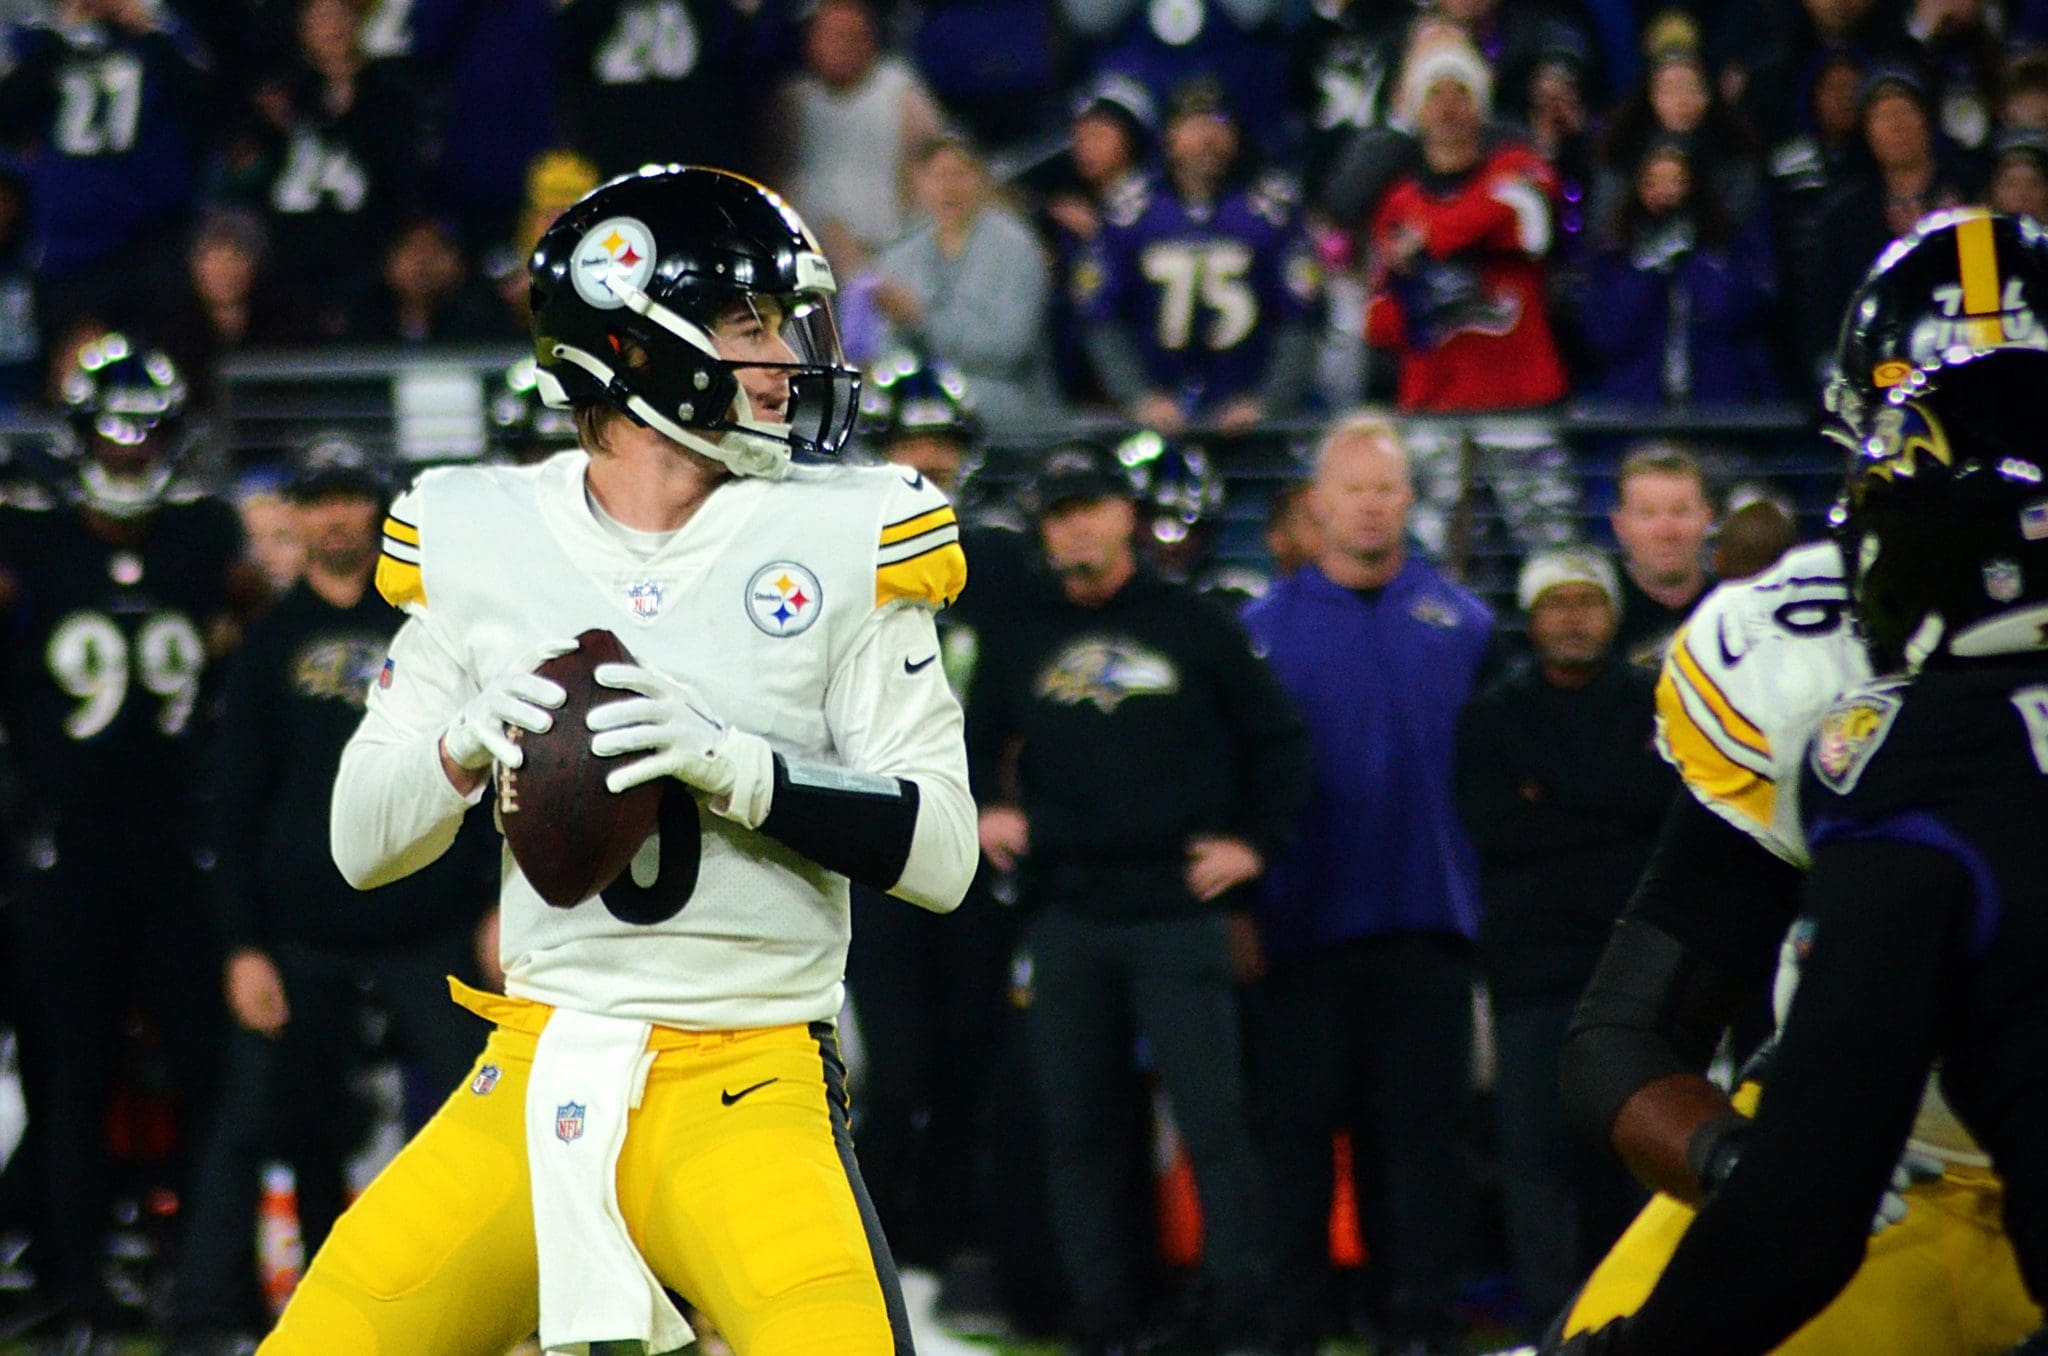 Kenny Pickett drops back to pass as the Steelers face the Ravens on Jan. 1, 2022 in Baltimore. (Mitchell Northam / Steelers Now)